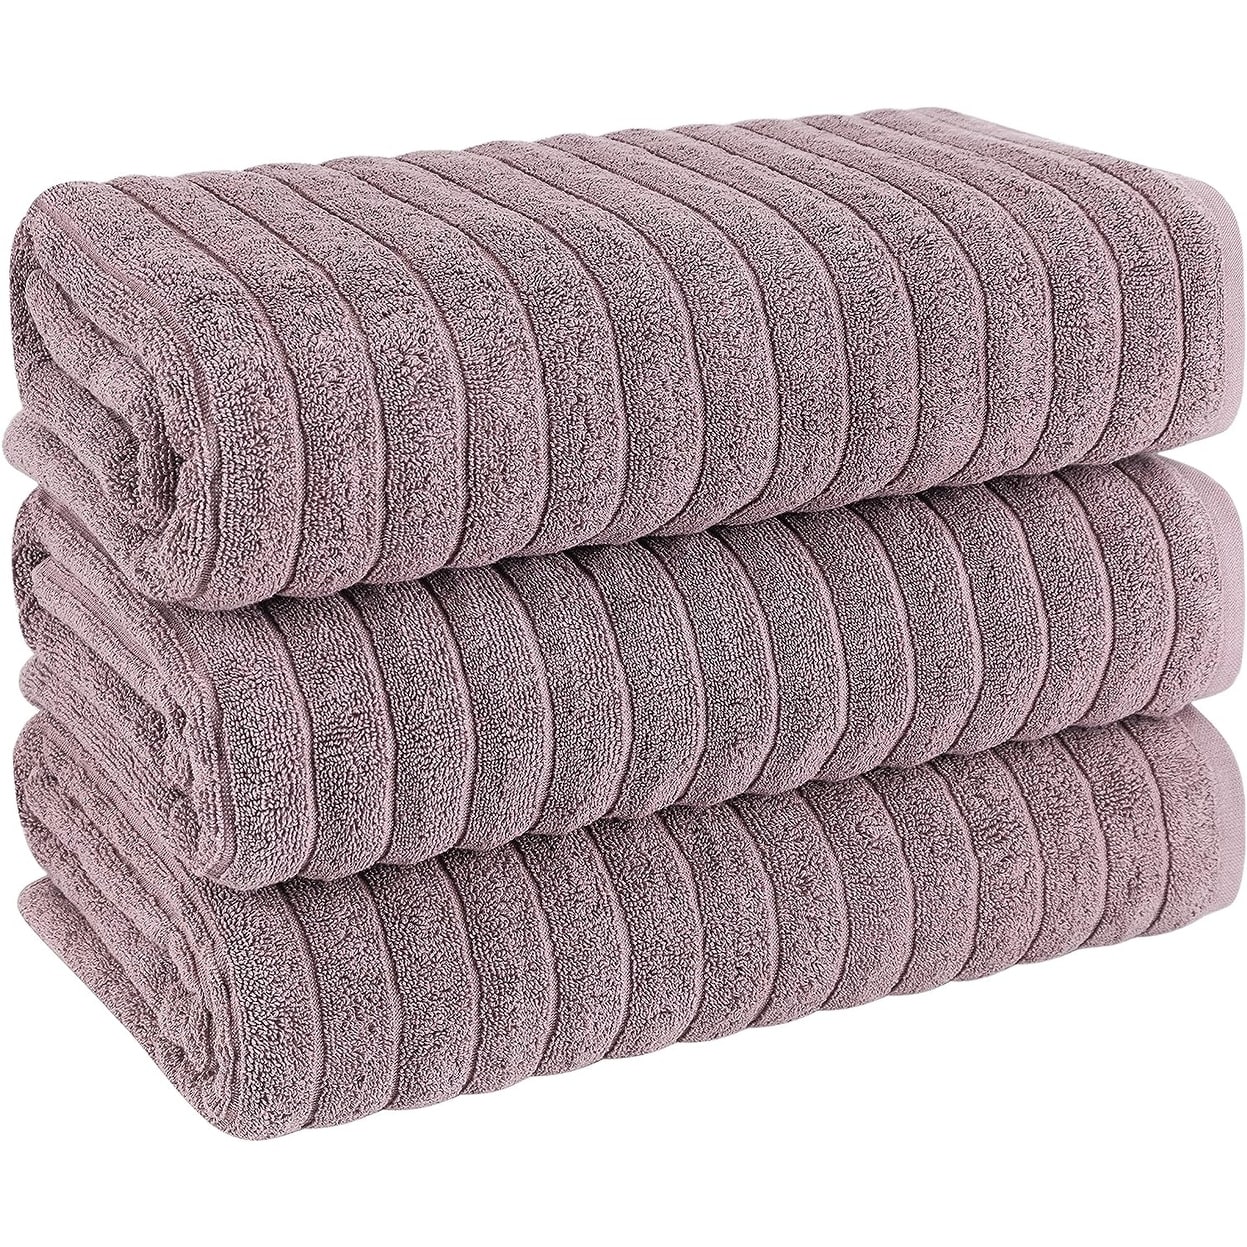 Classic Turkish Towel, Extra Large, Premium Cotton Bath,Thick and  Absorbent,Quick-Dry,Ribbed, Luxury Bathroom Towels, 27x55 Inch - AliExpress